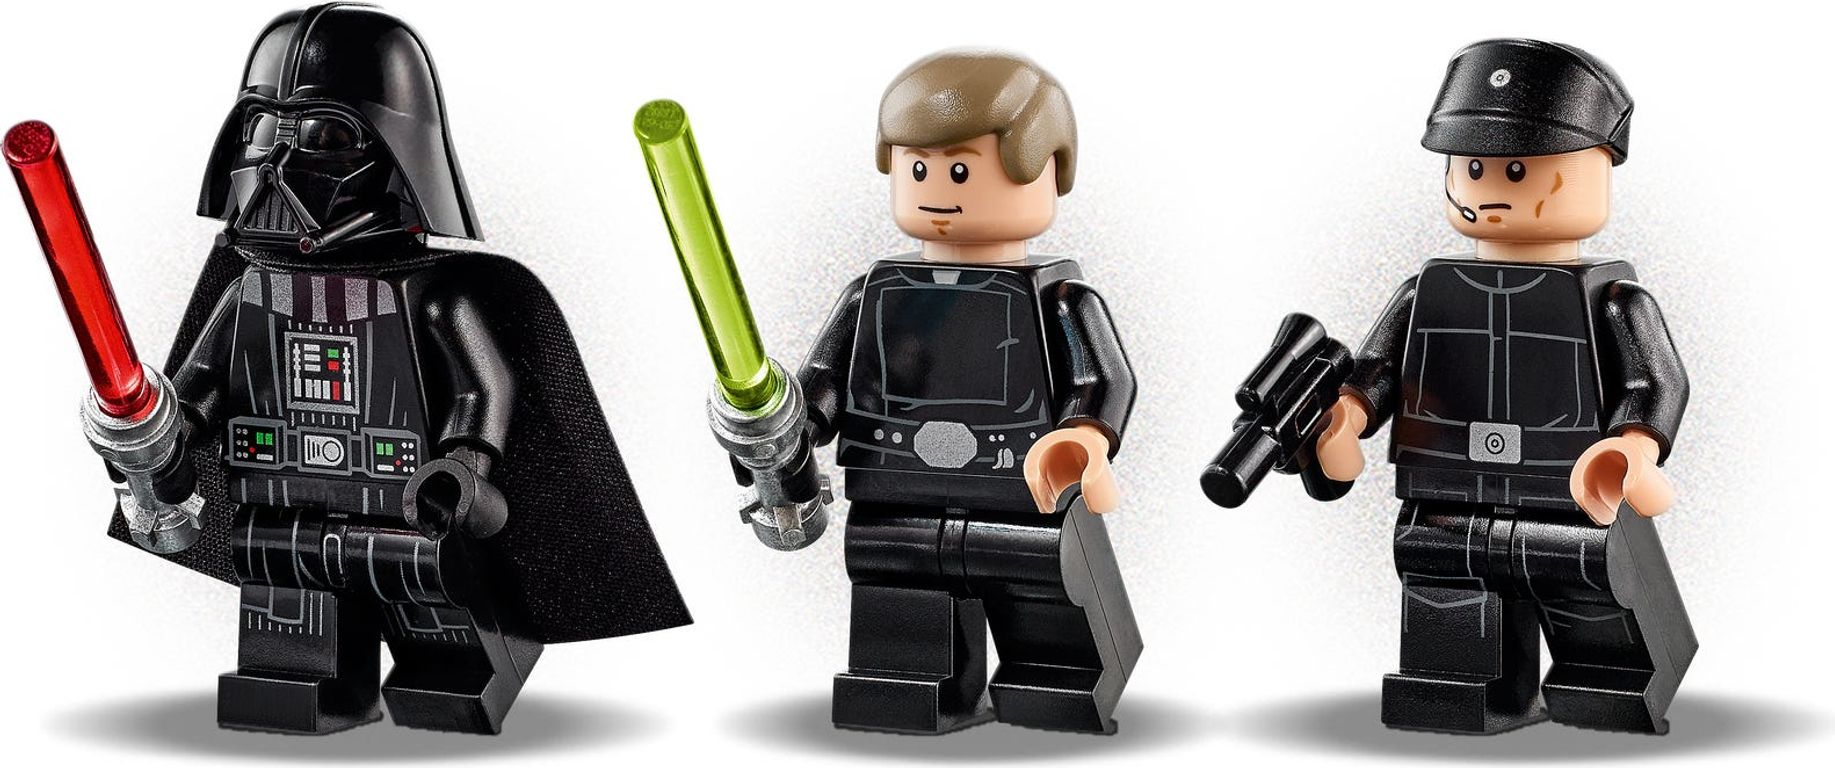 LEGO® Star Wars Imperial Shuttle™ minifigures